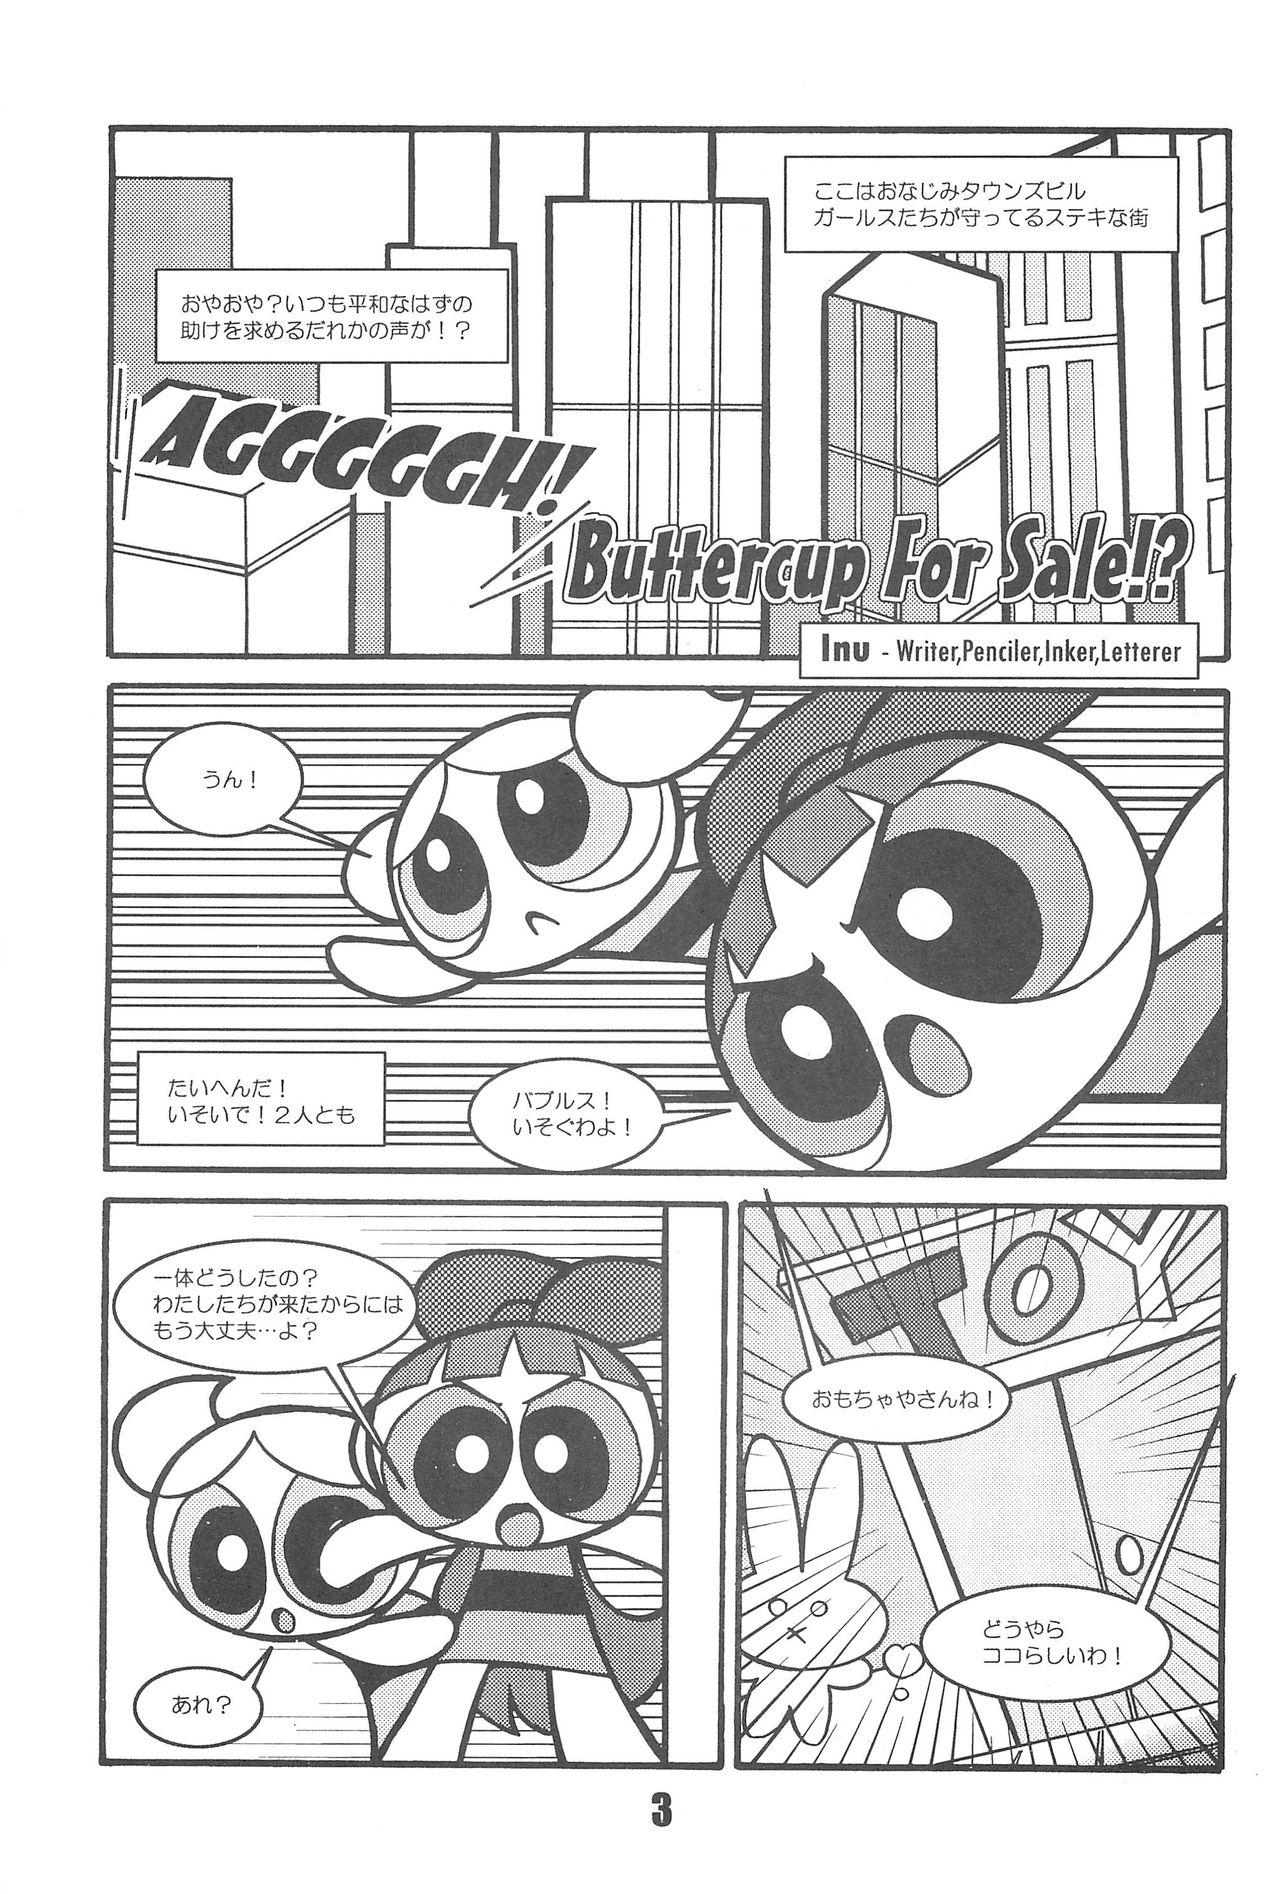 Blowjobs Show Goes On! Funhouse 22th - The powerpuff girls Round Ass - Page 3